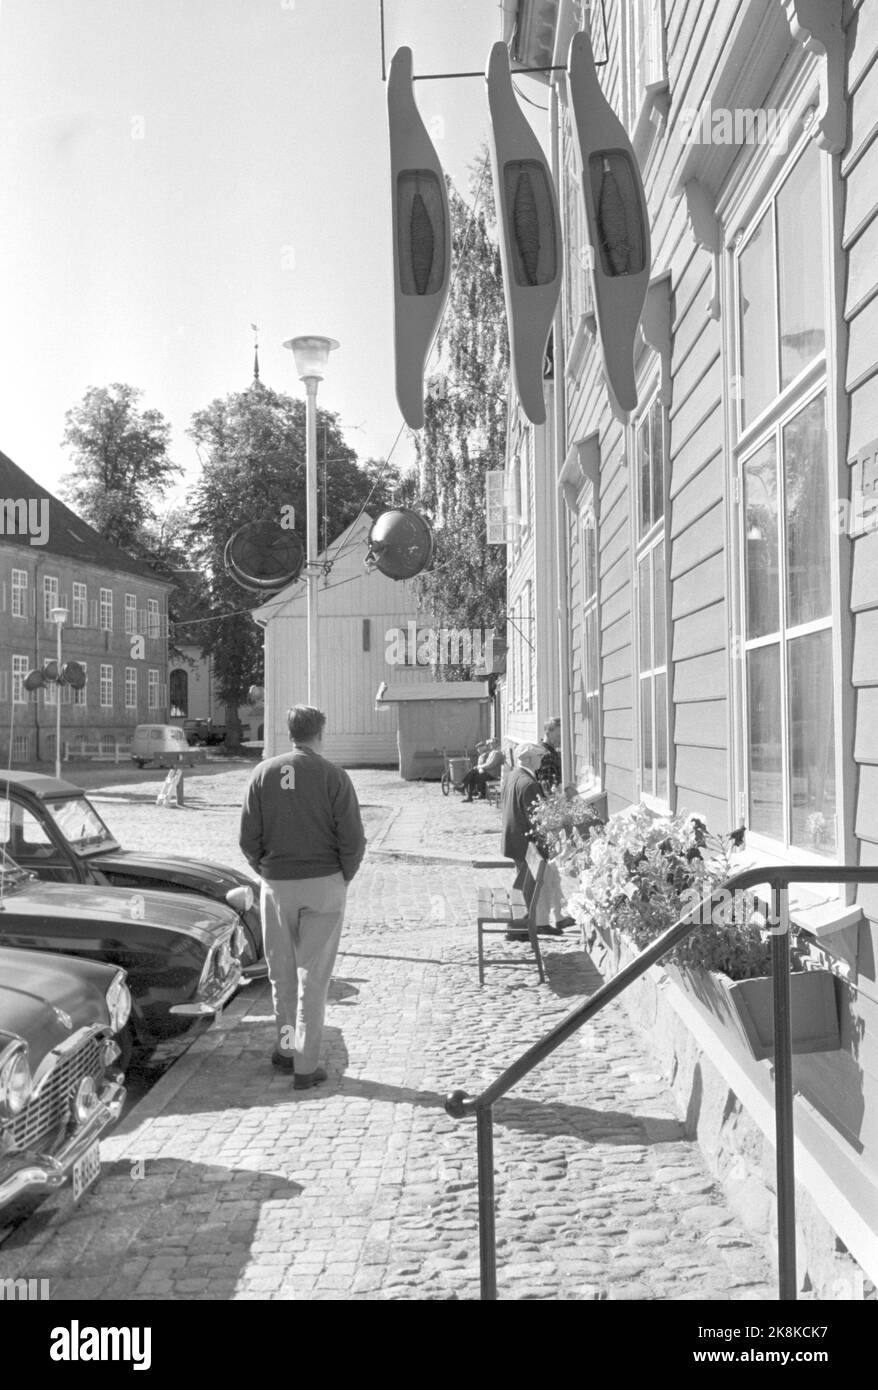 Fredrikstad 19670909 'The Old Town lives' The only preserved fortress town of the Nordic region - built in the Umbrella, now a large, peaceful idyll - is located in Fredrikstad. -It is this year (1967) 400 years since King Fredrik II gave Fredrikstad city privileges. The Old Town In Fredrikstad, there is a game of Living Museum, which tells about the development of the city's dramatic history. The weave of Plus in the building t.v. The wedding is laid by slaves. To h. We see the infantry aspect. Photo; Sverre A. Børretzen / Current / NTB Photo not image treated! Stock Photo